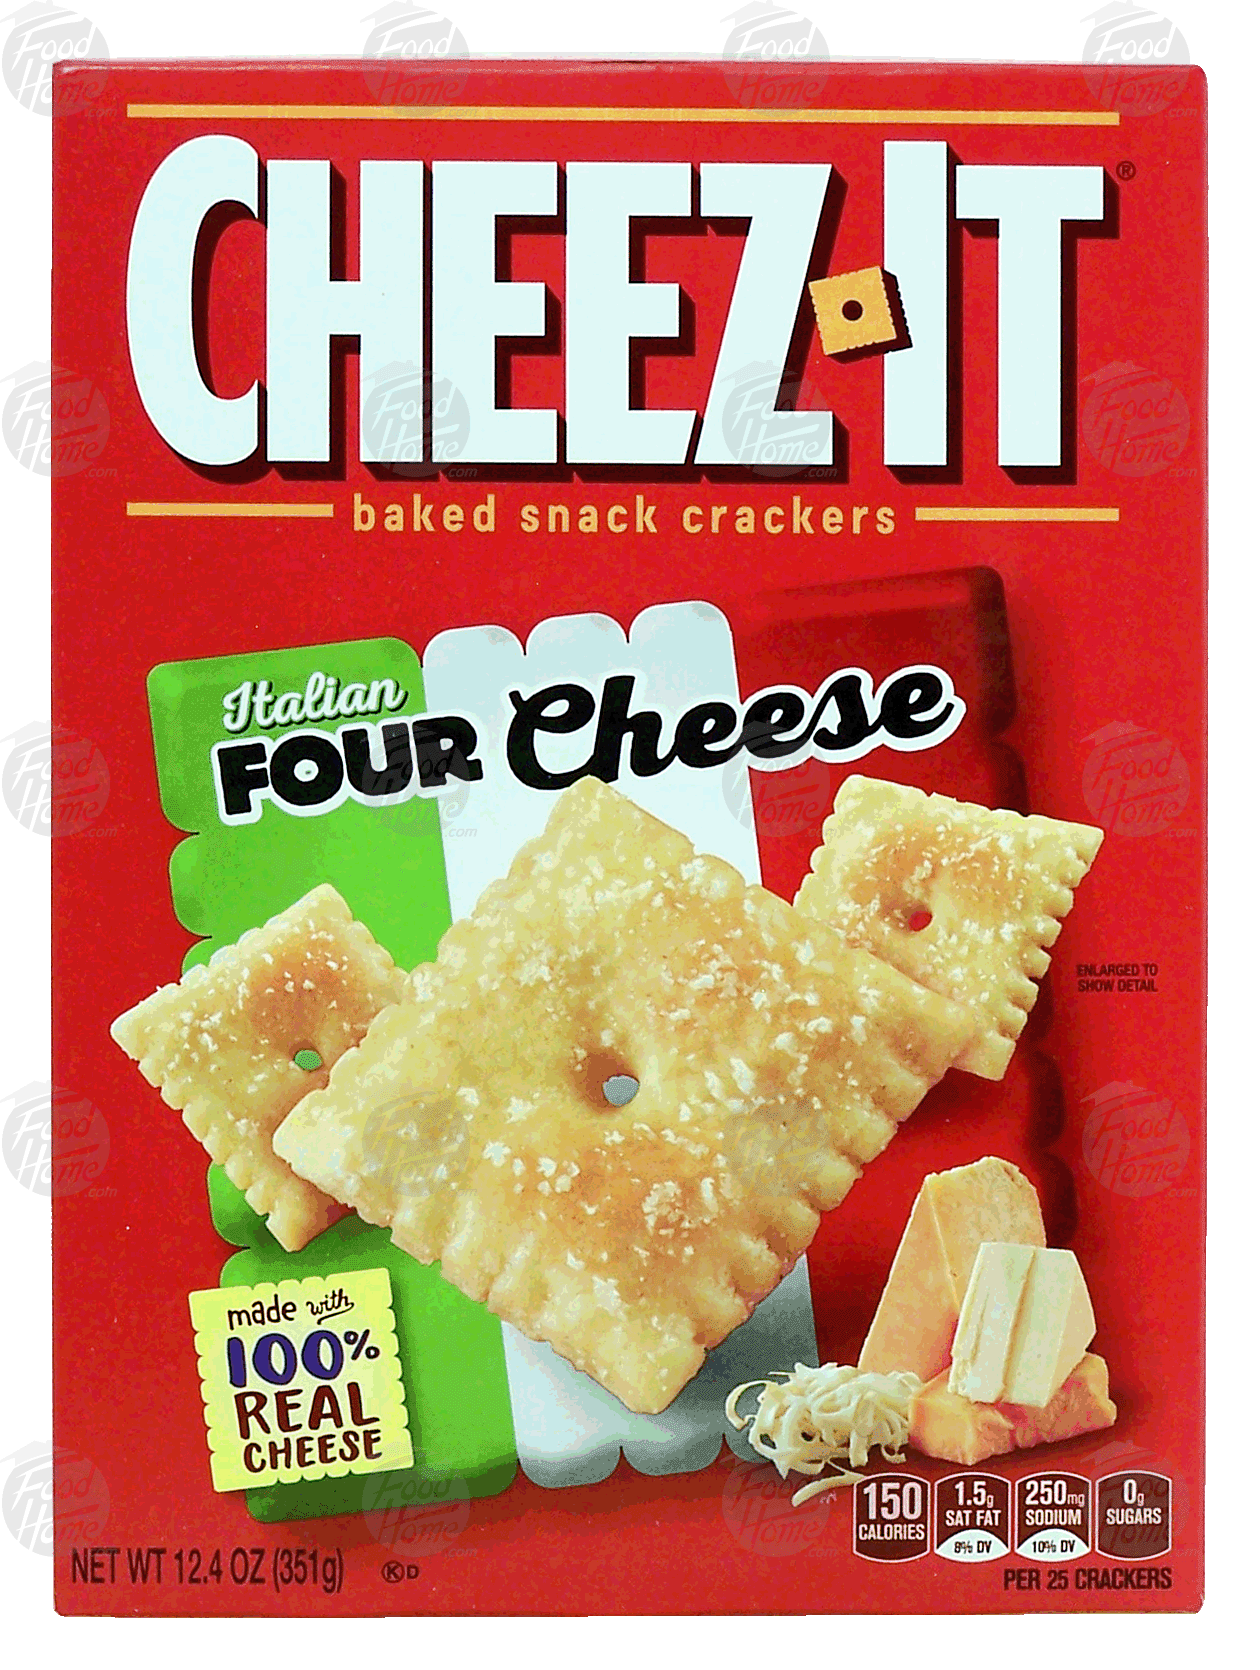 Sunshine Cheez-It italian four cheese baked snack crackers Full-Size Picture